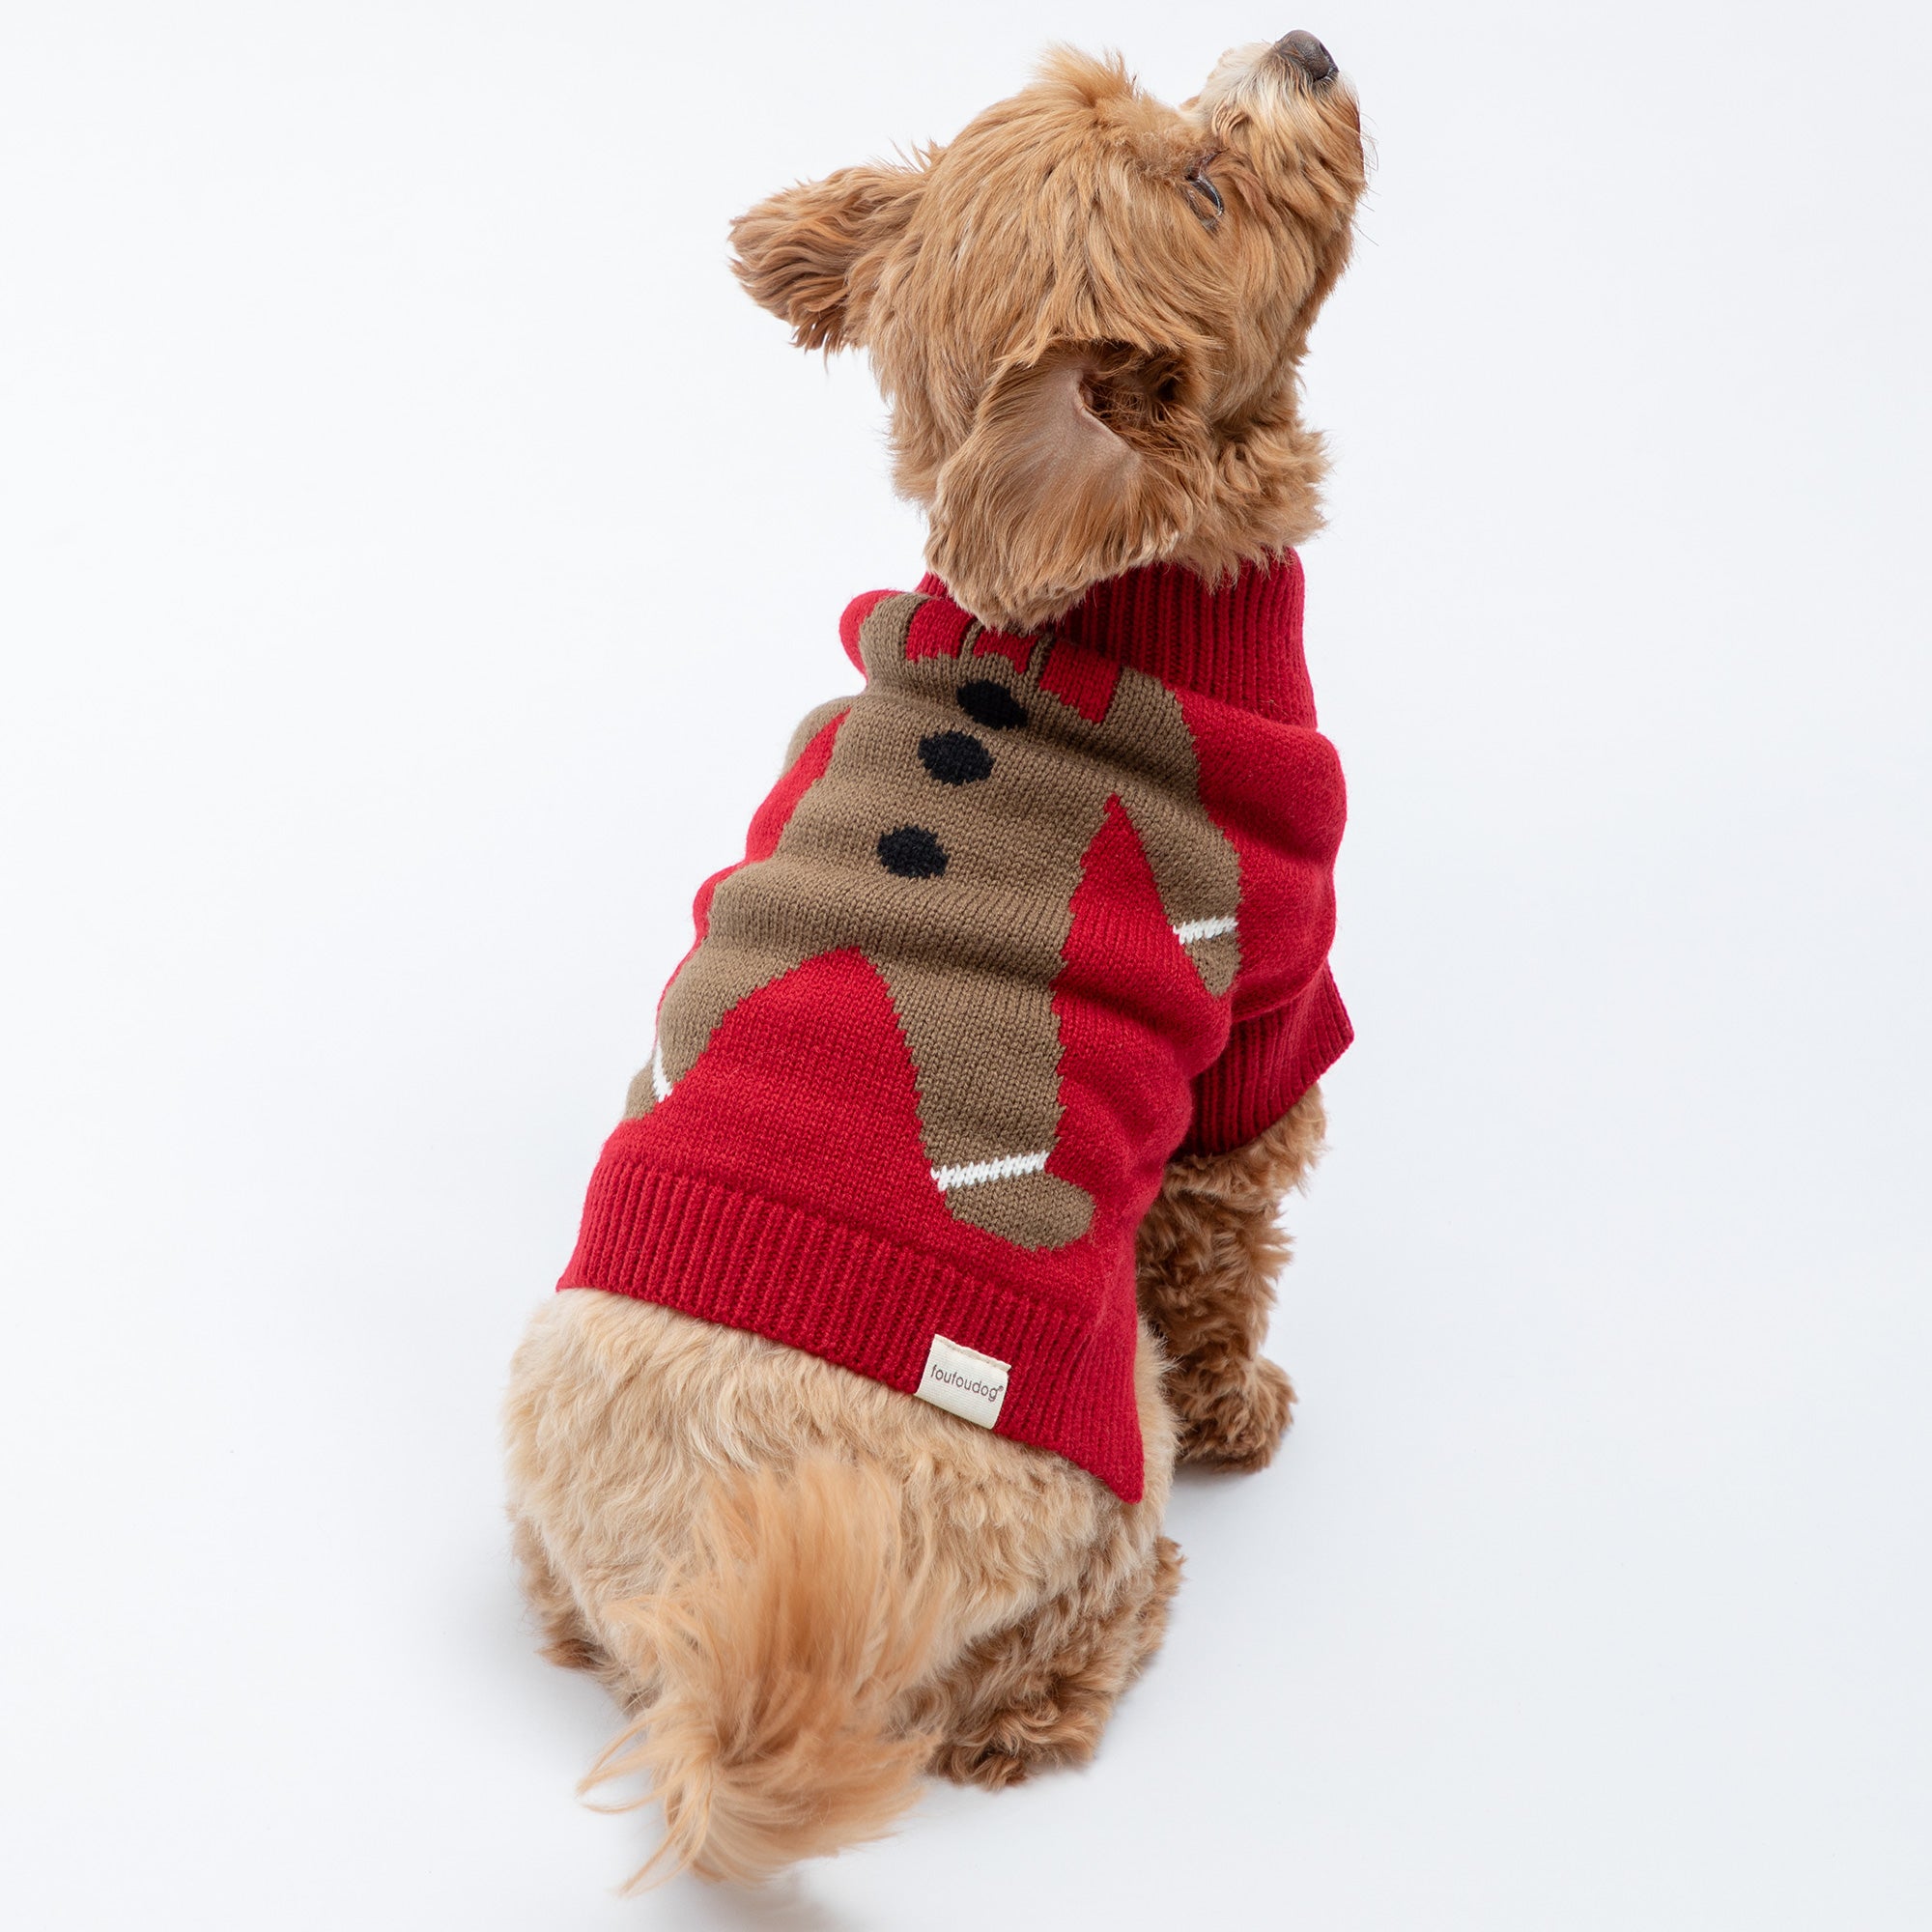 Cozy Christmas Pet Sweater - Gingerbread - L